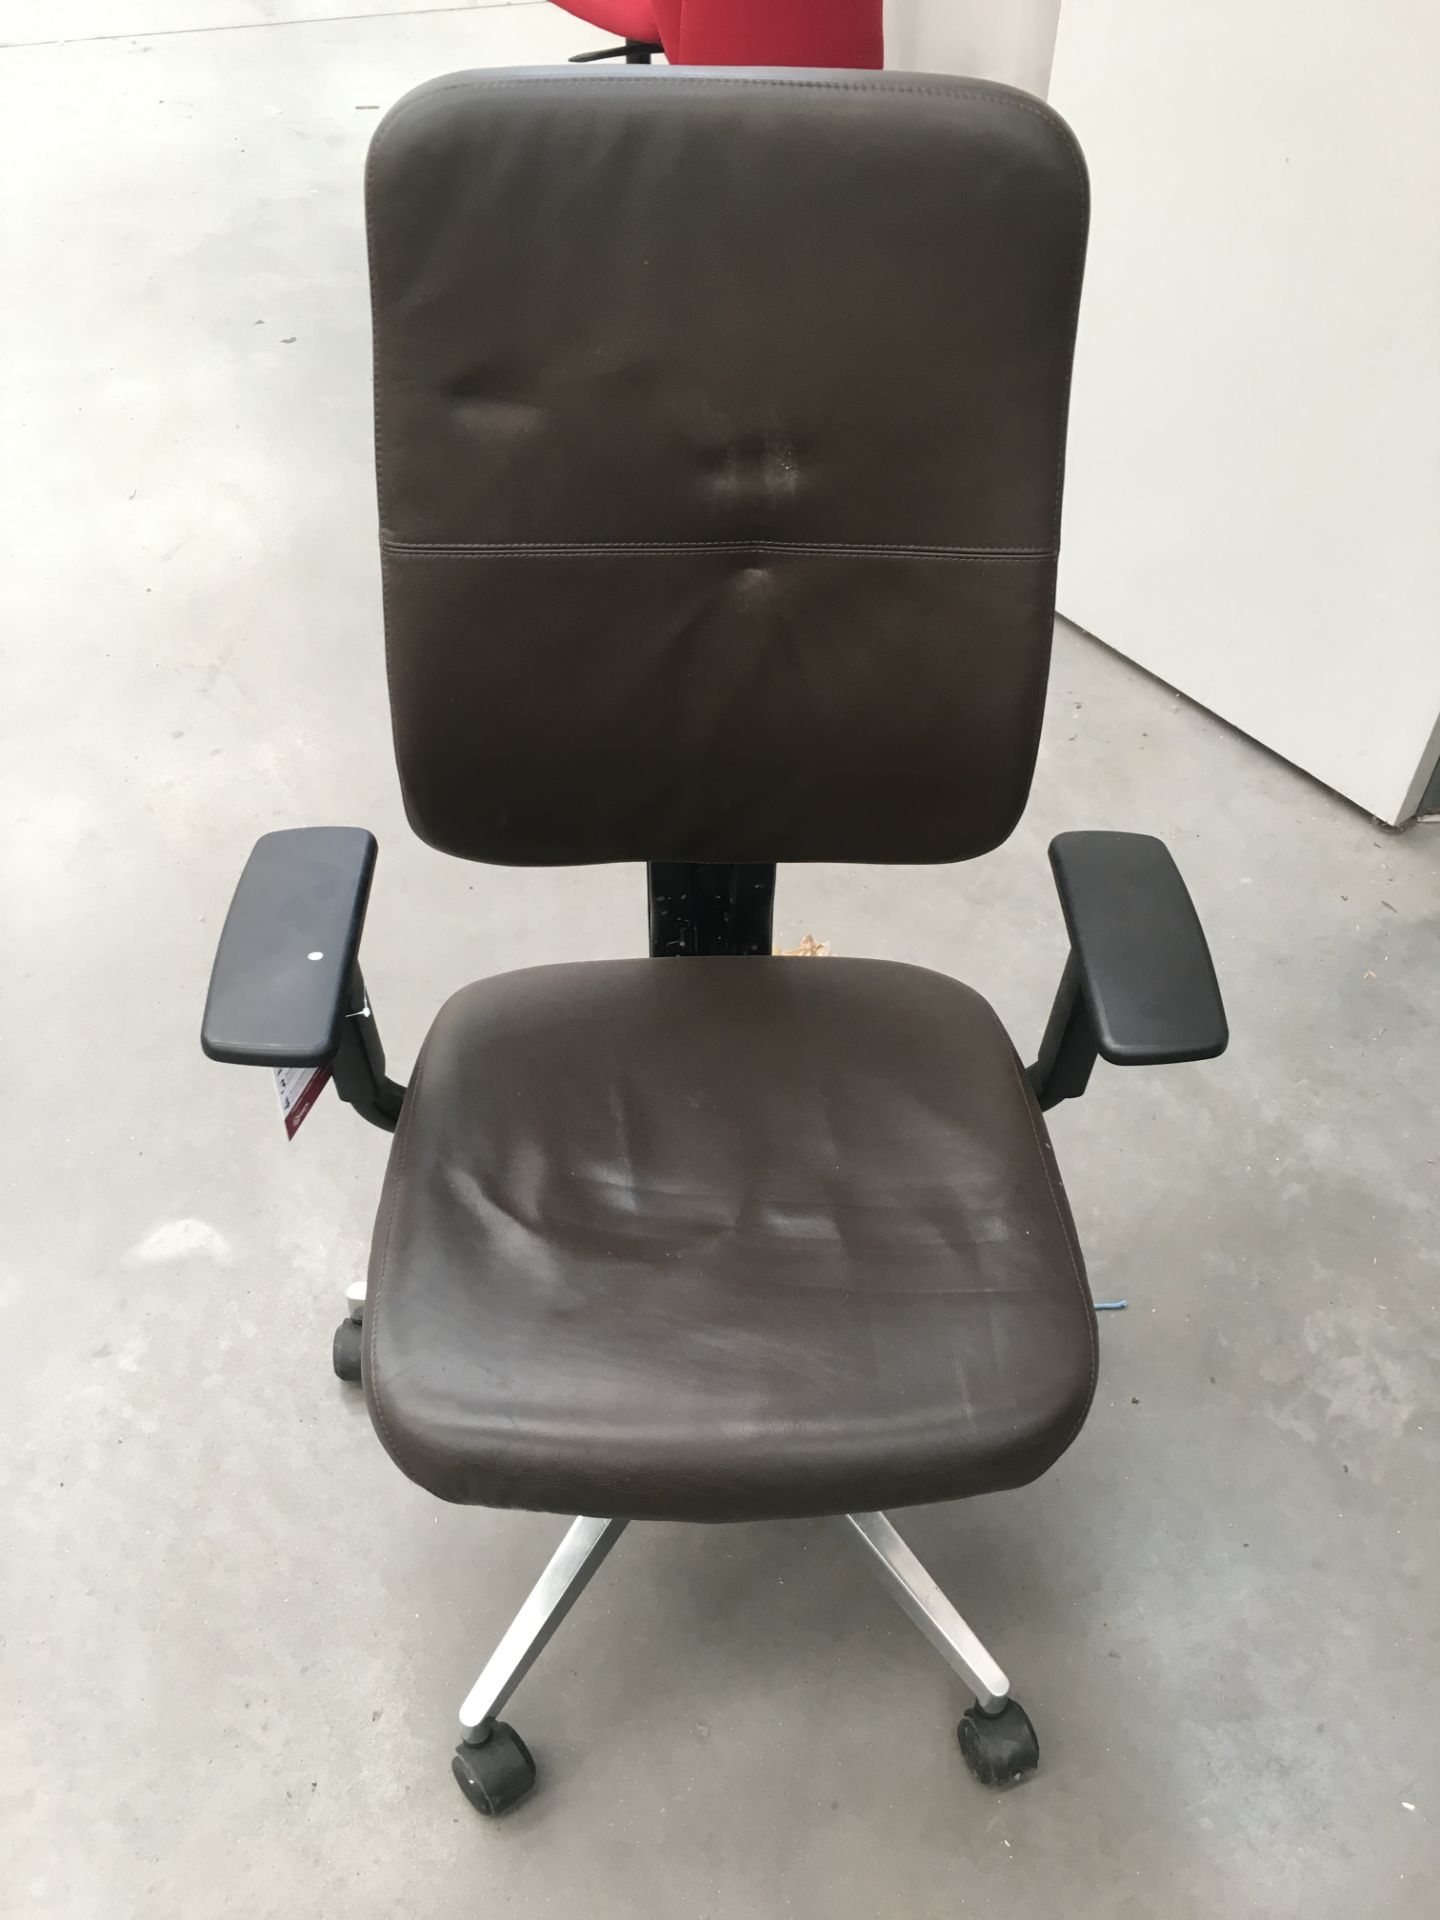 24 x Faux leather adjustable typist chairs with arms - Image 3 of 3